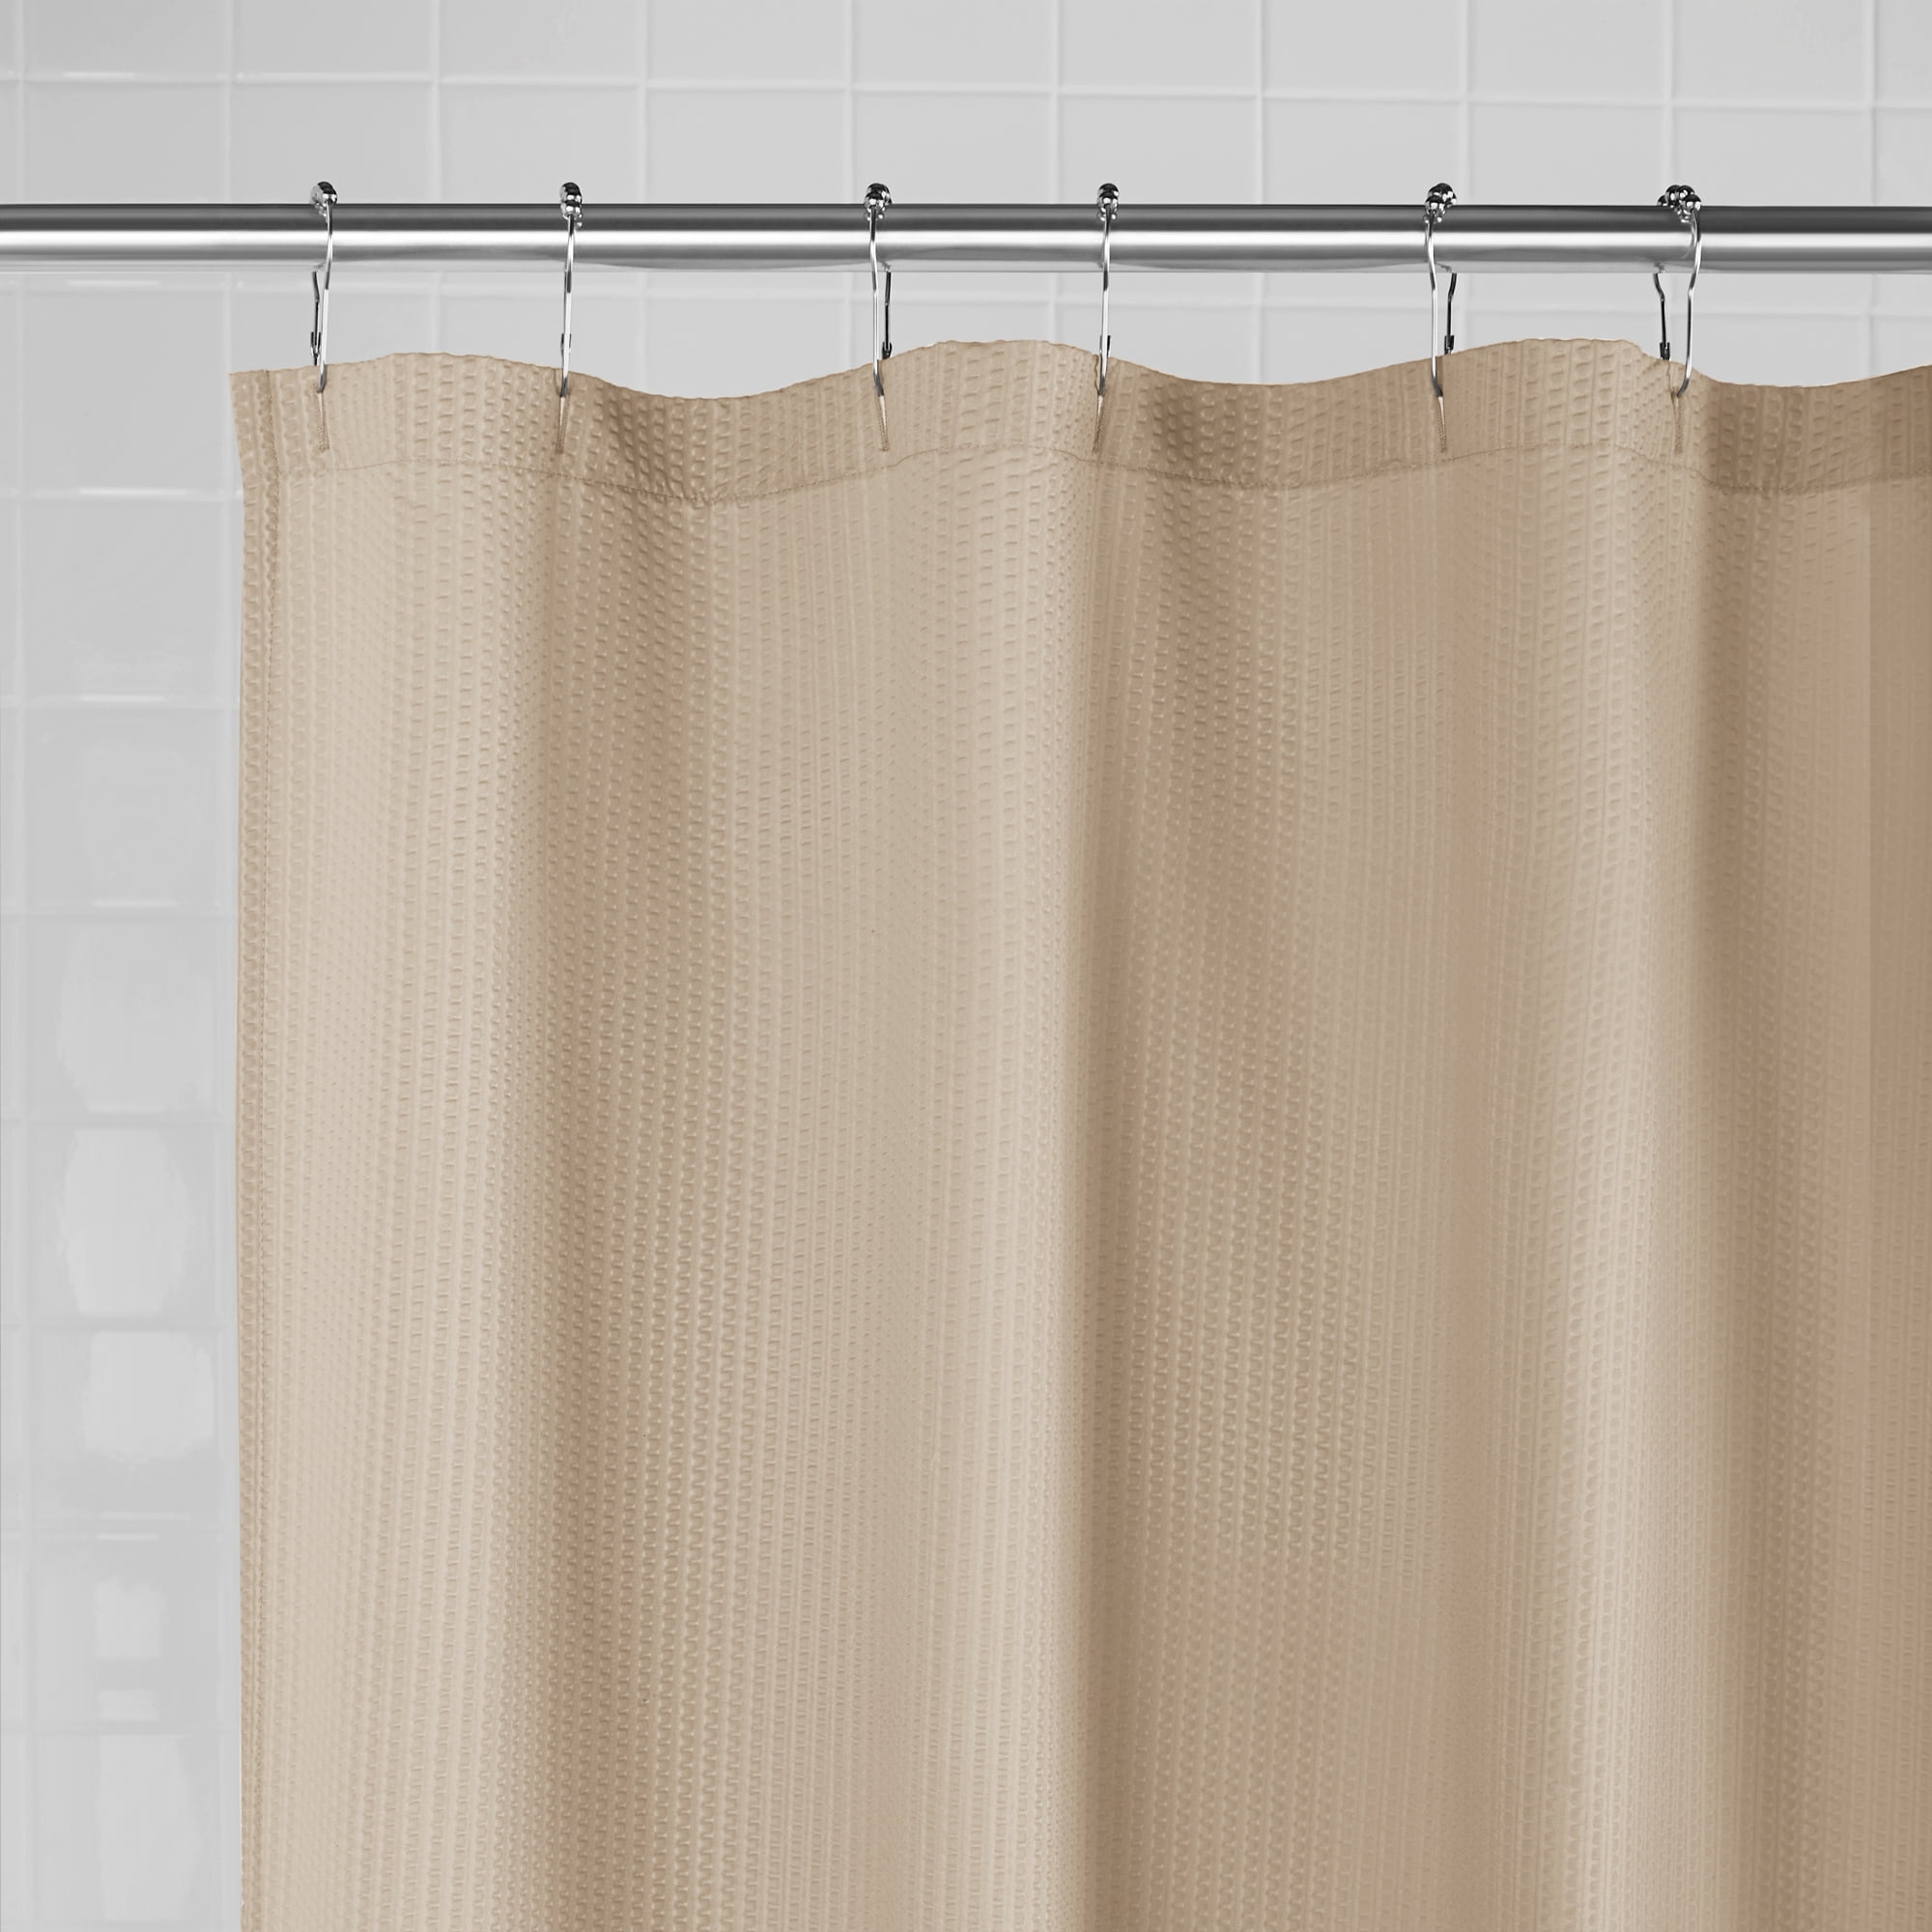 Mainstays Embossed Fabric Shower Liner, Does A Fabric Shower Curtain Need Liner